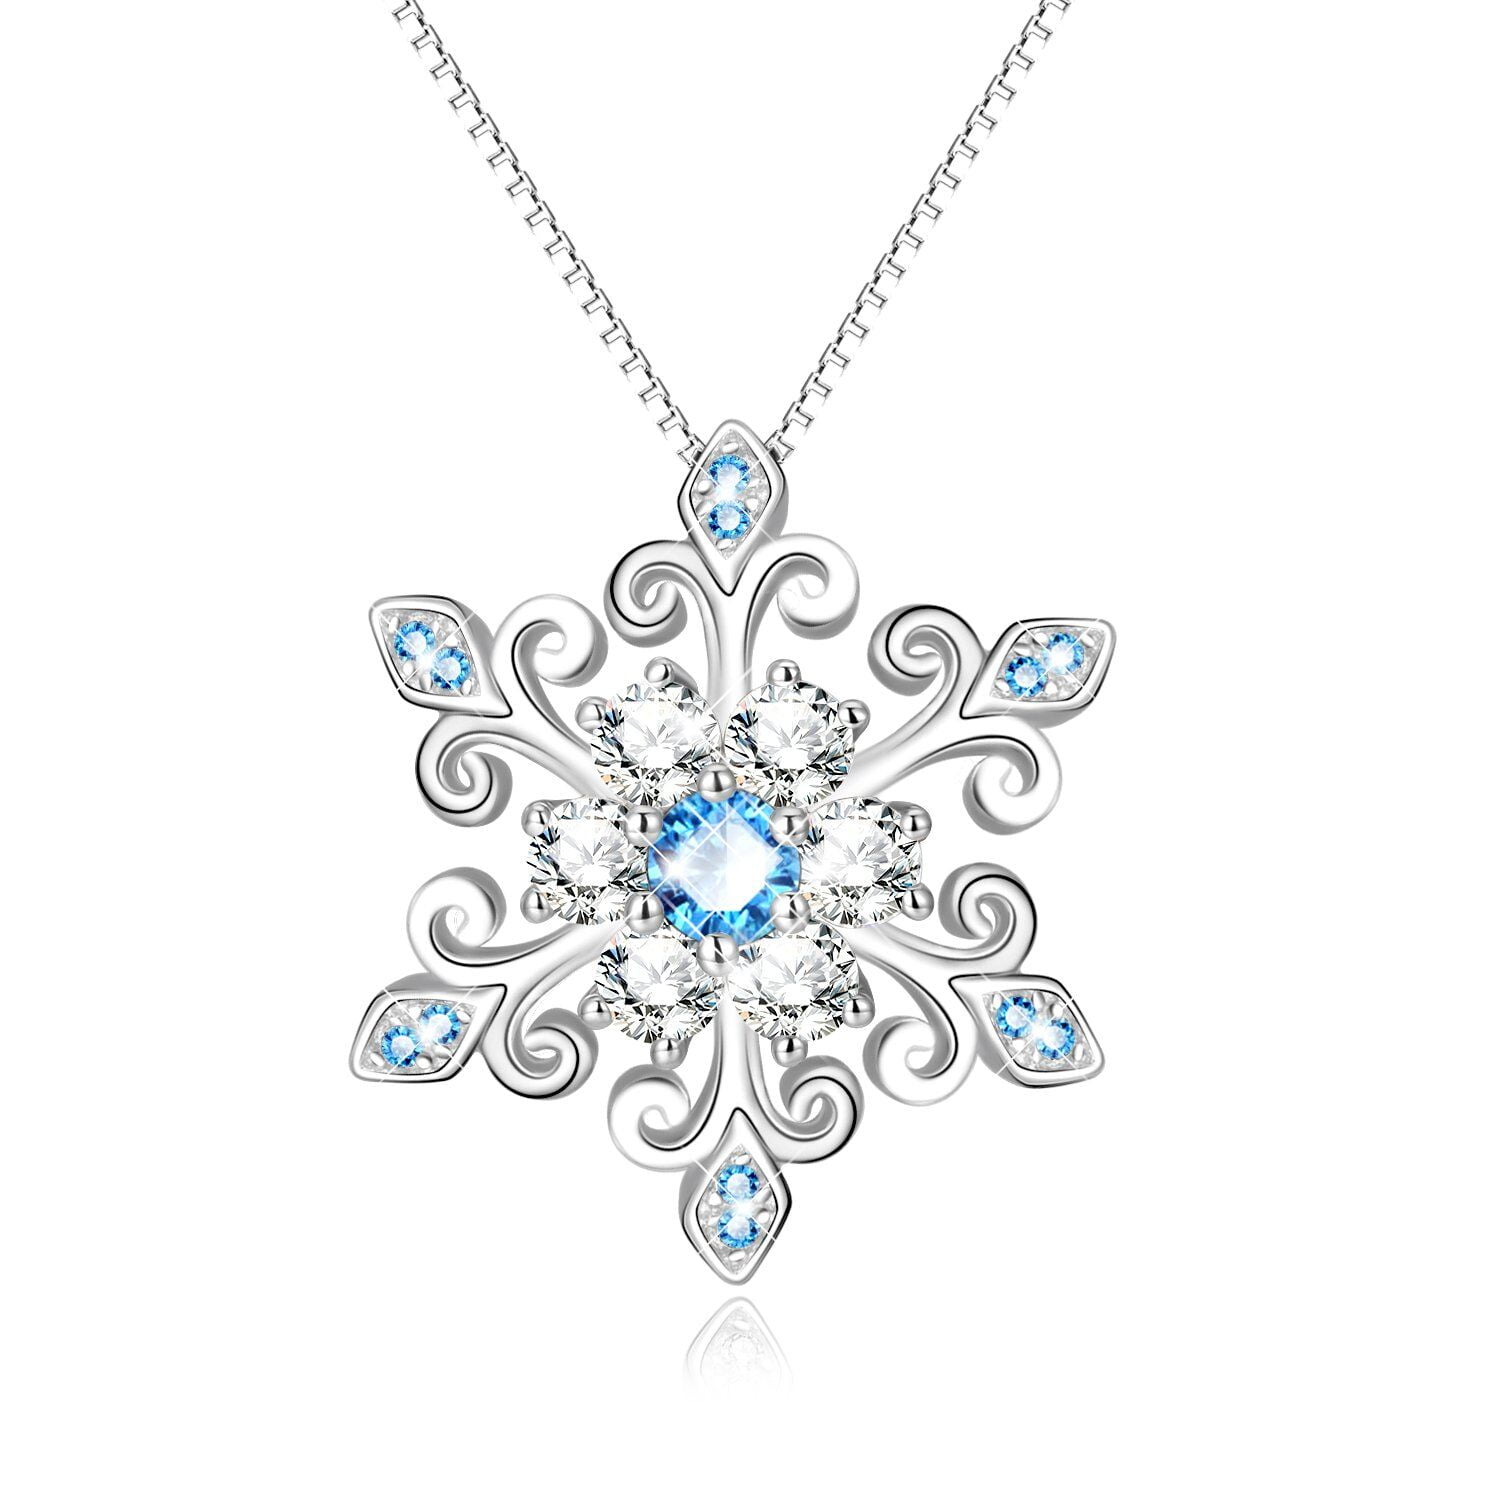 PALE BLUE SNOWFLAKE STAR PENDANT SILVER TONE CHAIN NECKLACE GIRL LADIES GIFT KID 